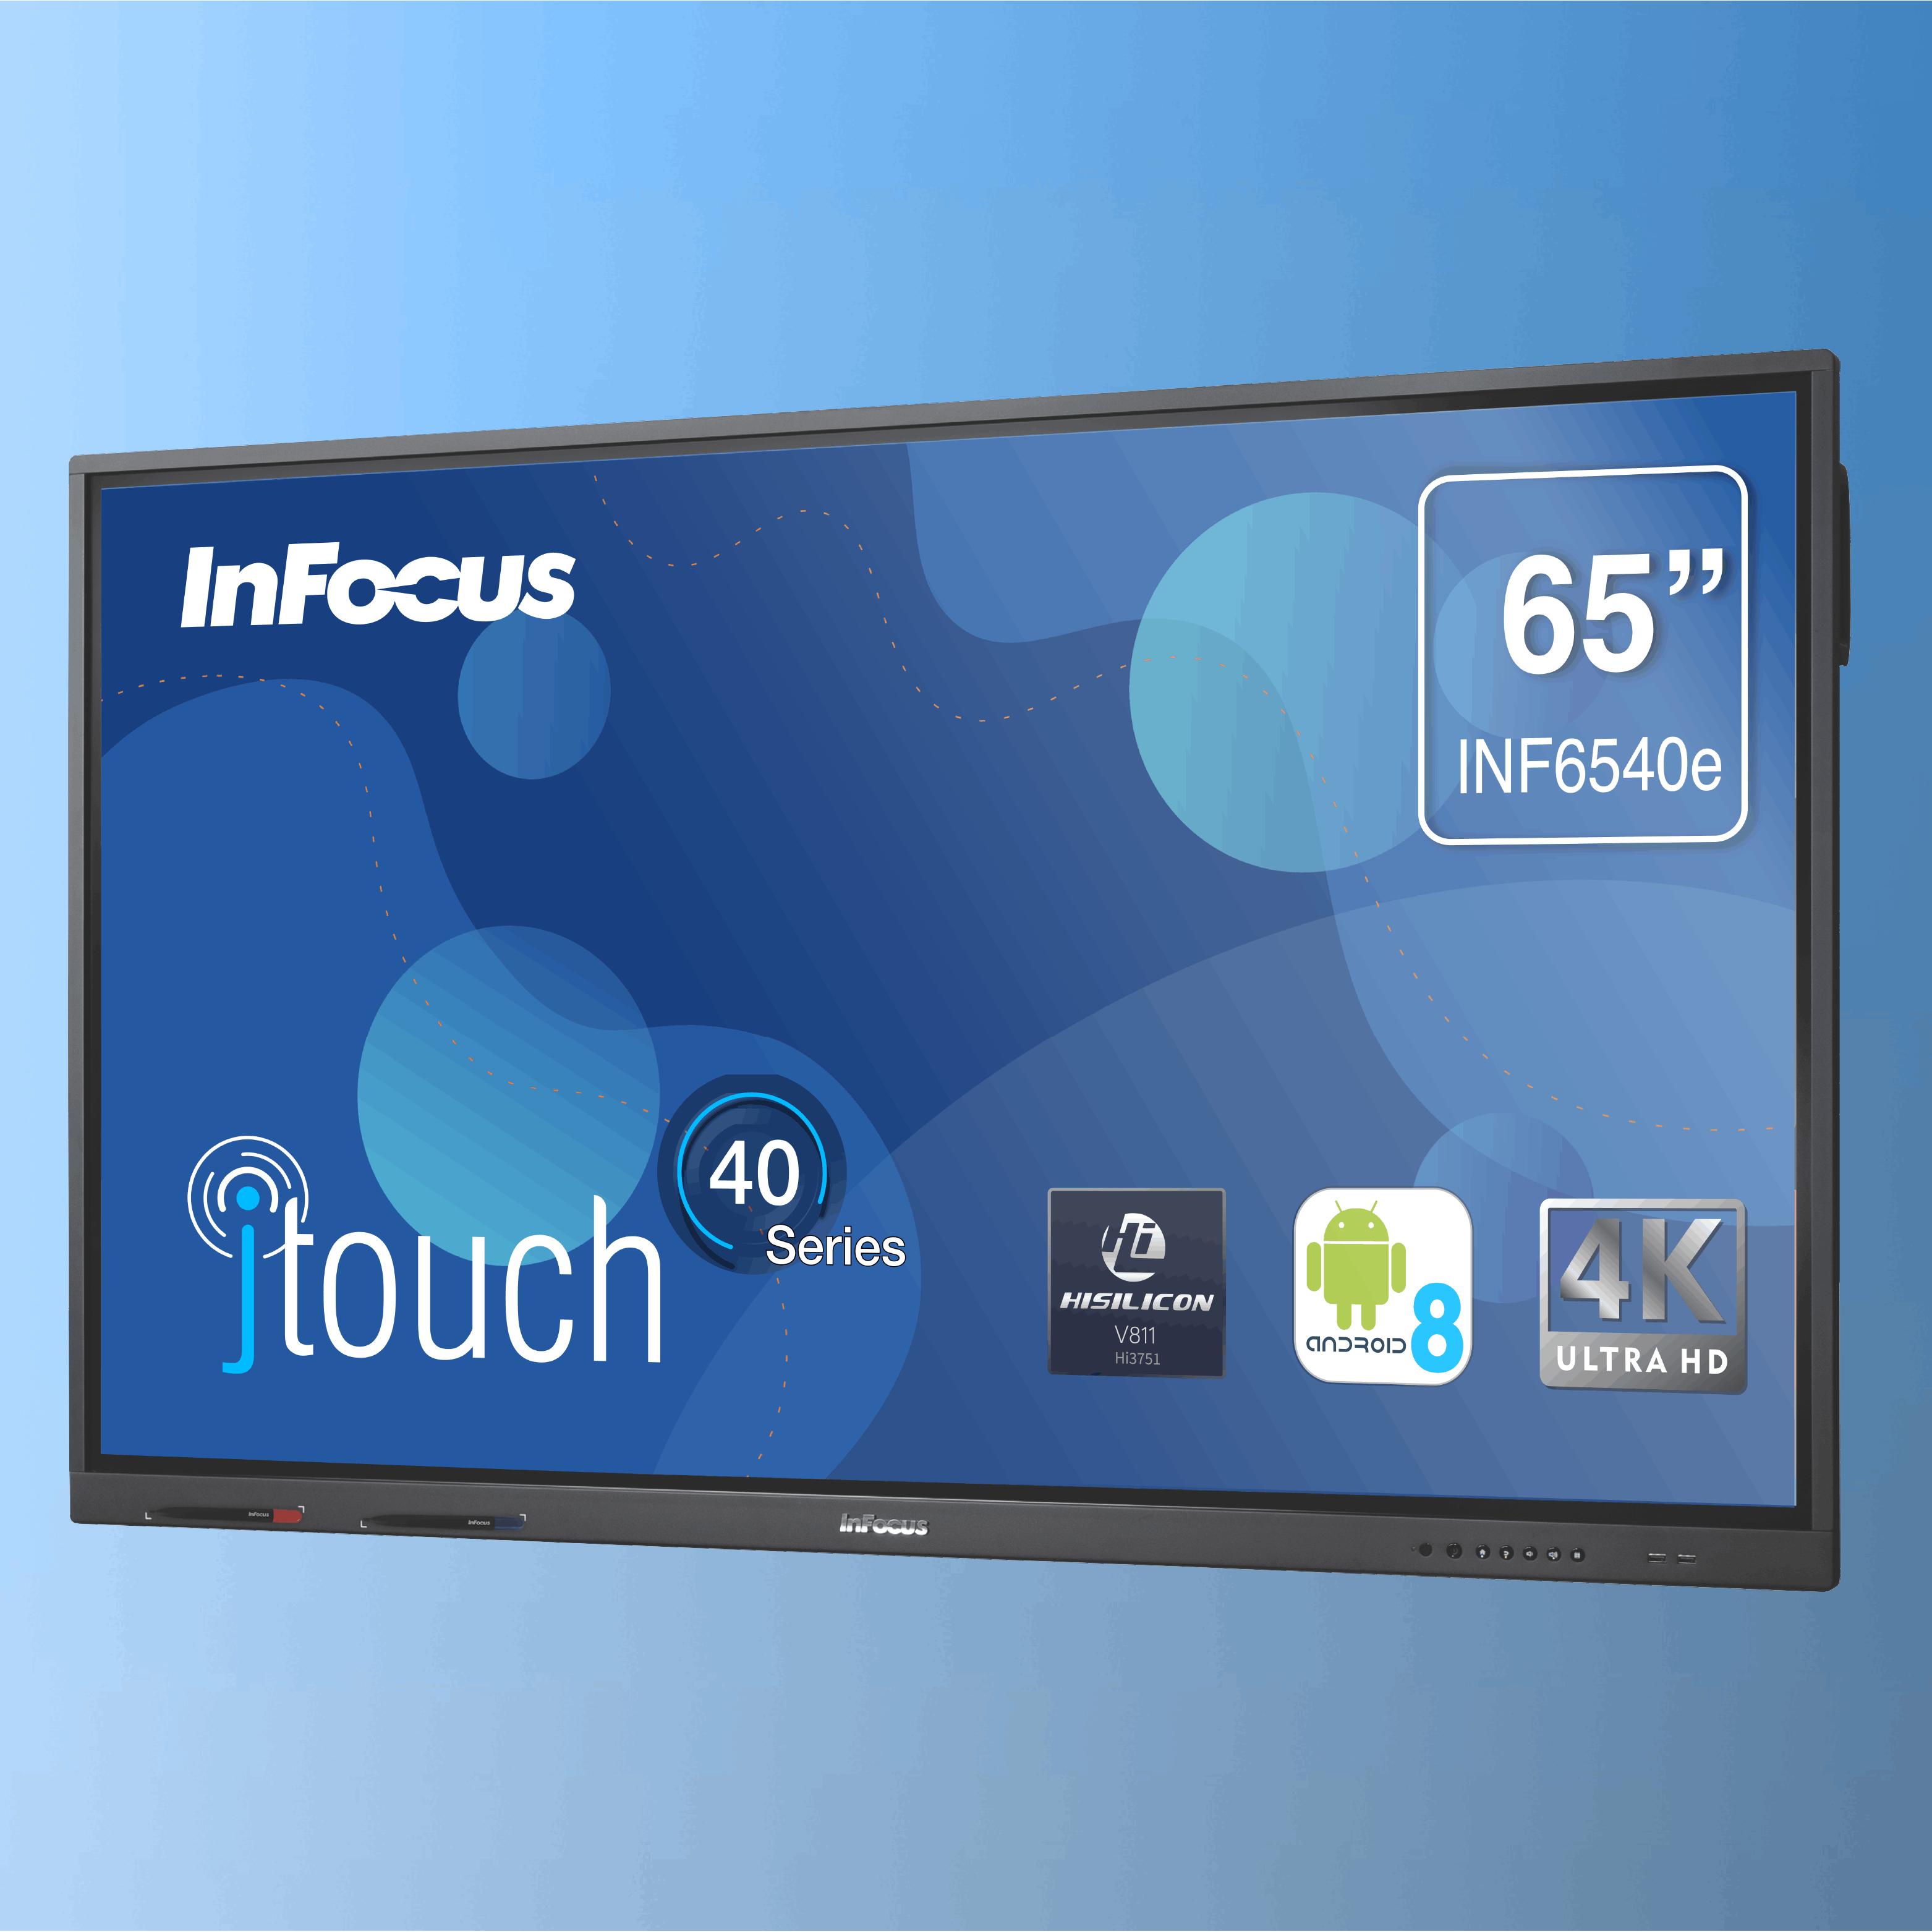 JTouch Series 40 - INF6540e